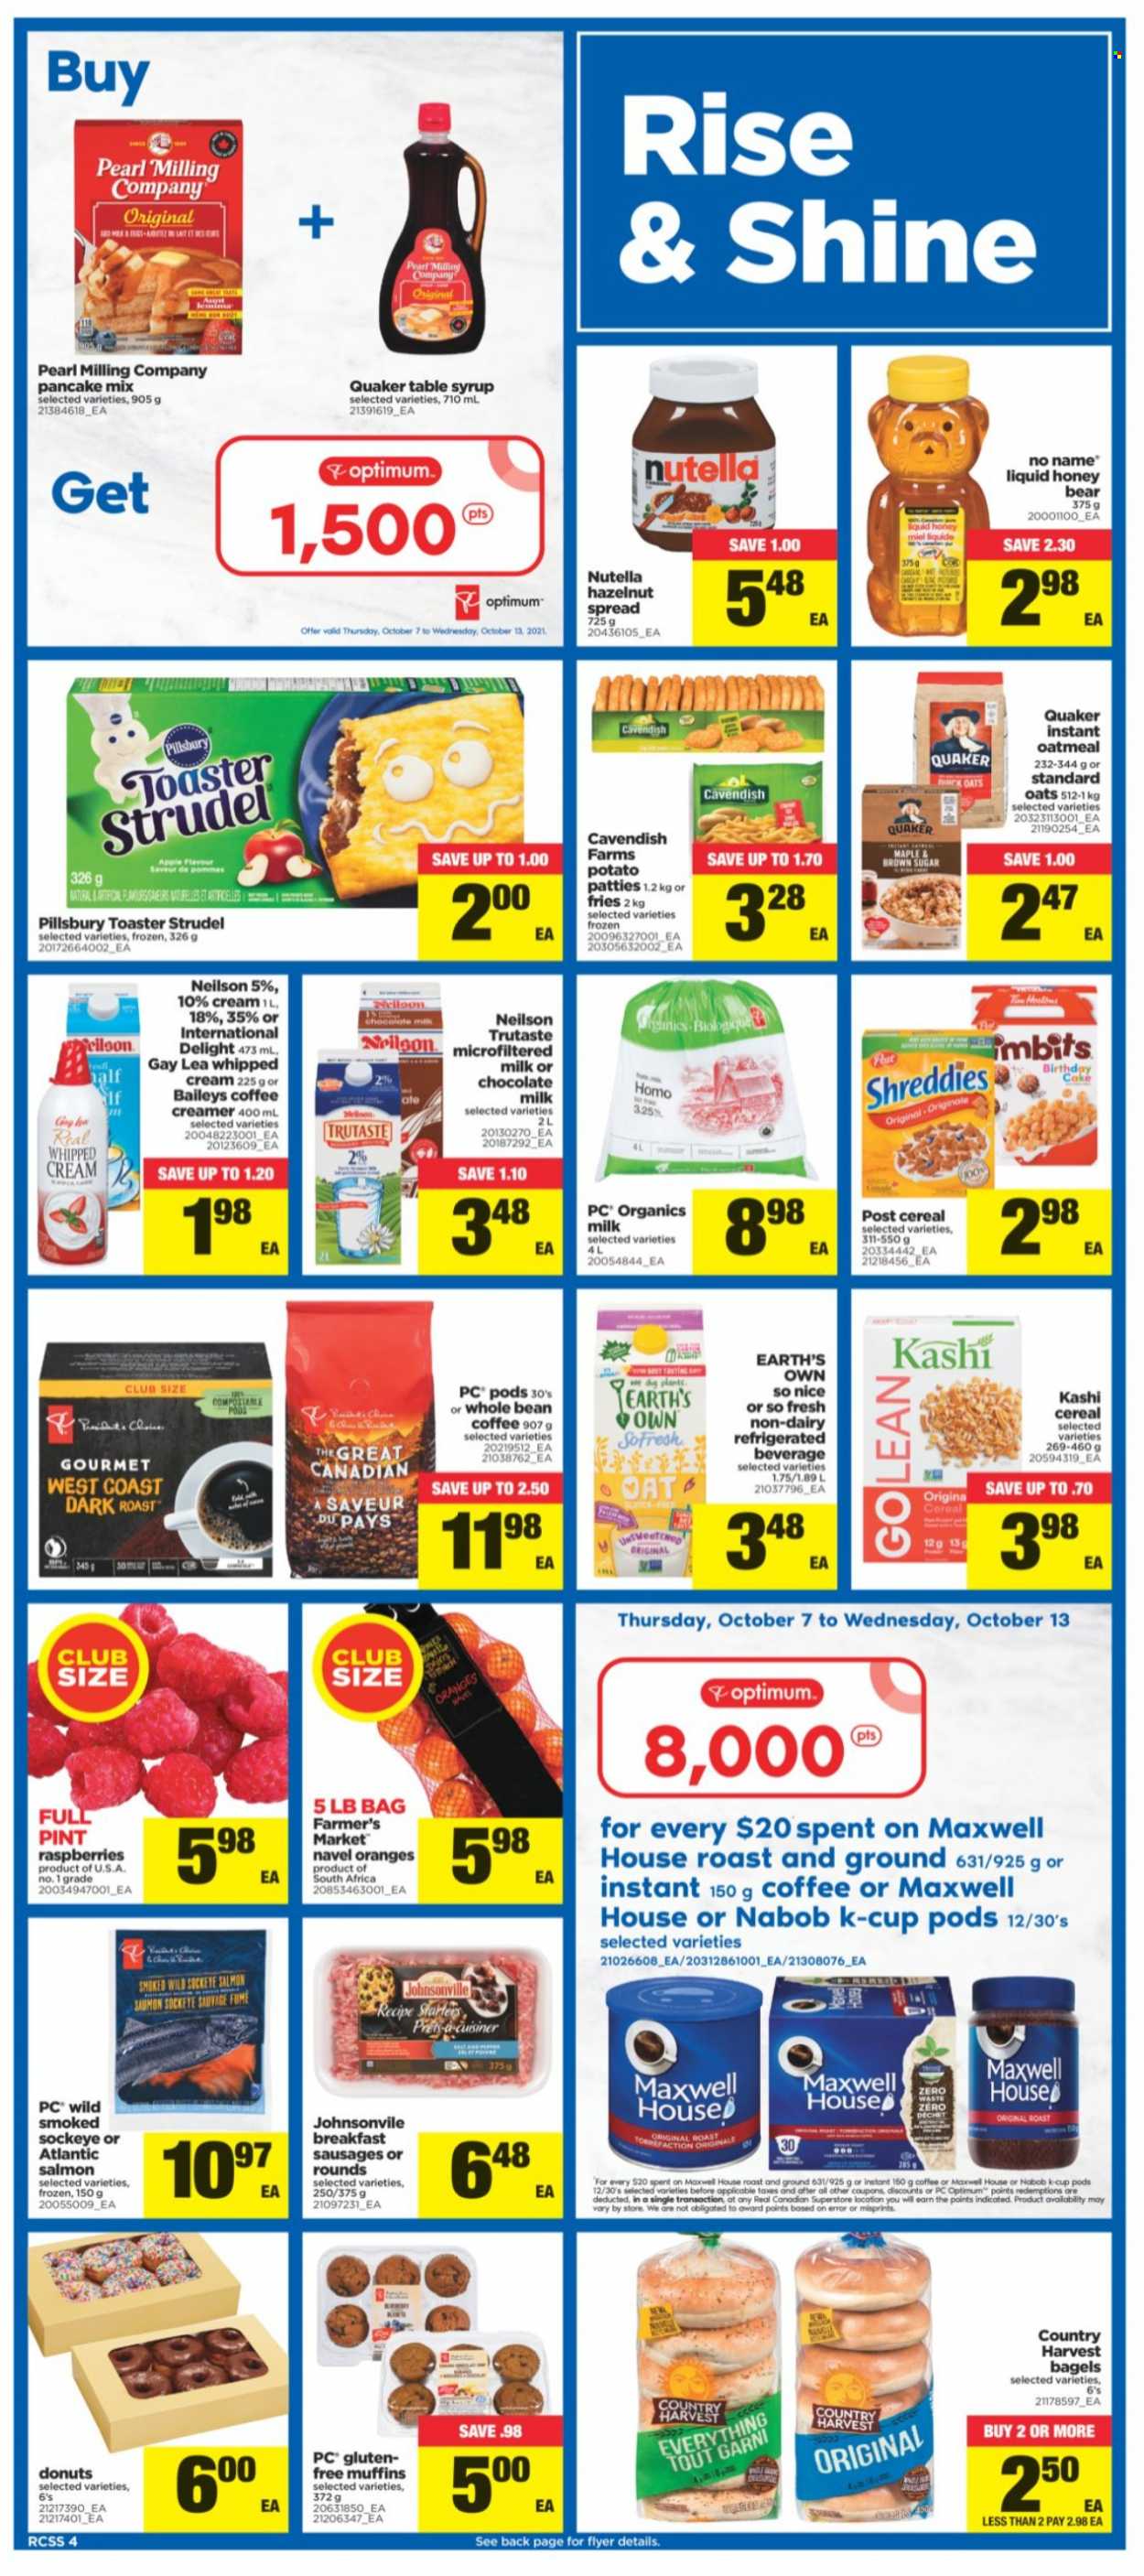 thumbnail - Real Canadian Superstore Flyer - October 07, 2021 - October 13, 2021 - Sales products - bagels, cake, donut, muffin, navel oranges, salmon, No Name, pancakes, Pillsbury, Quaker, Johnsonville, sausage, organic milk, whipped cream, creamer, Country Harvest, potato fries, milk chocolate, chocolate, oatmeal, oats, cereals, honey, syrup, hazelnut spread, Maxwell House, coffee, coffee capsules, K-Cups, So Nice, Baileys, Optimum, table, Nutella, oranges. Page 4.